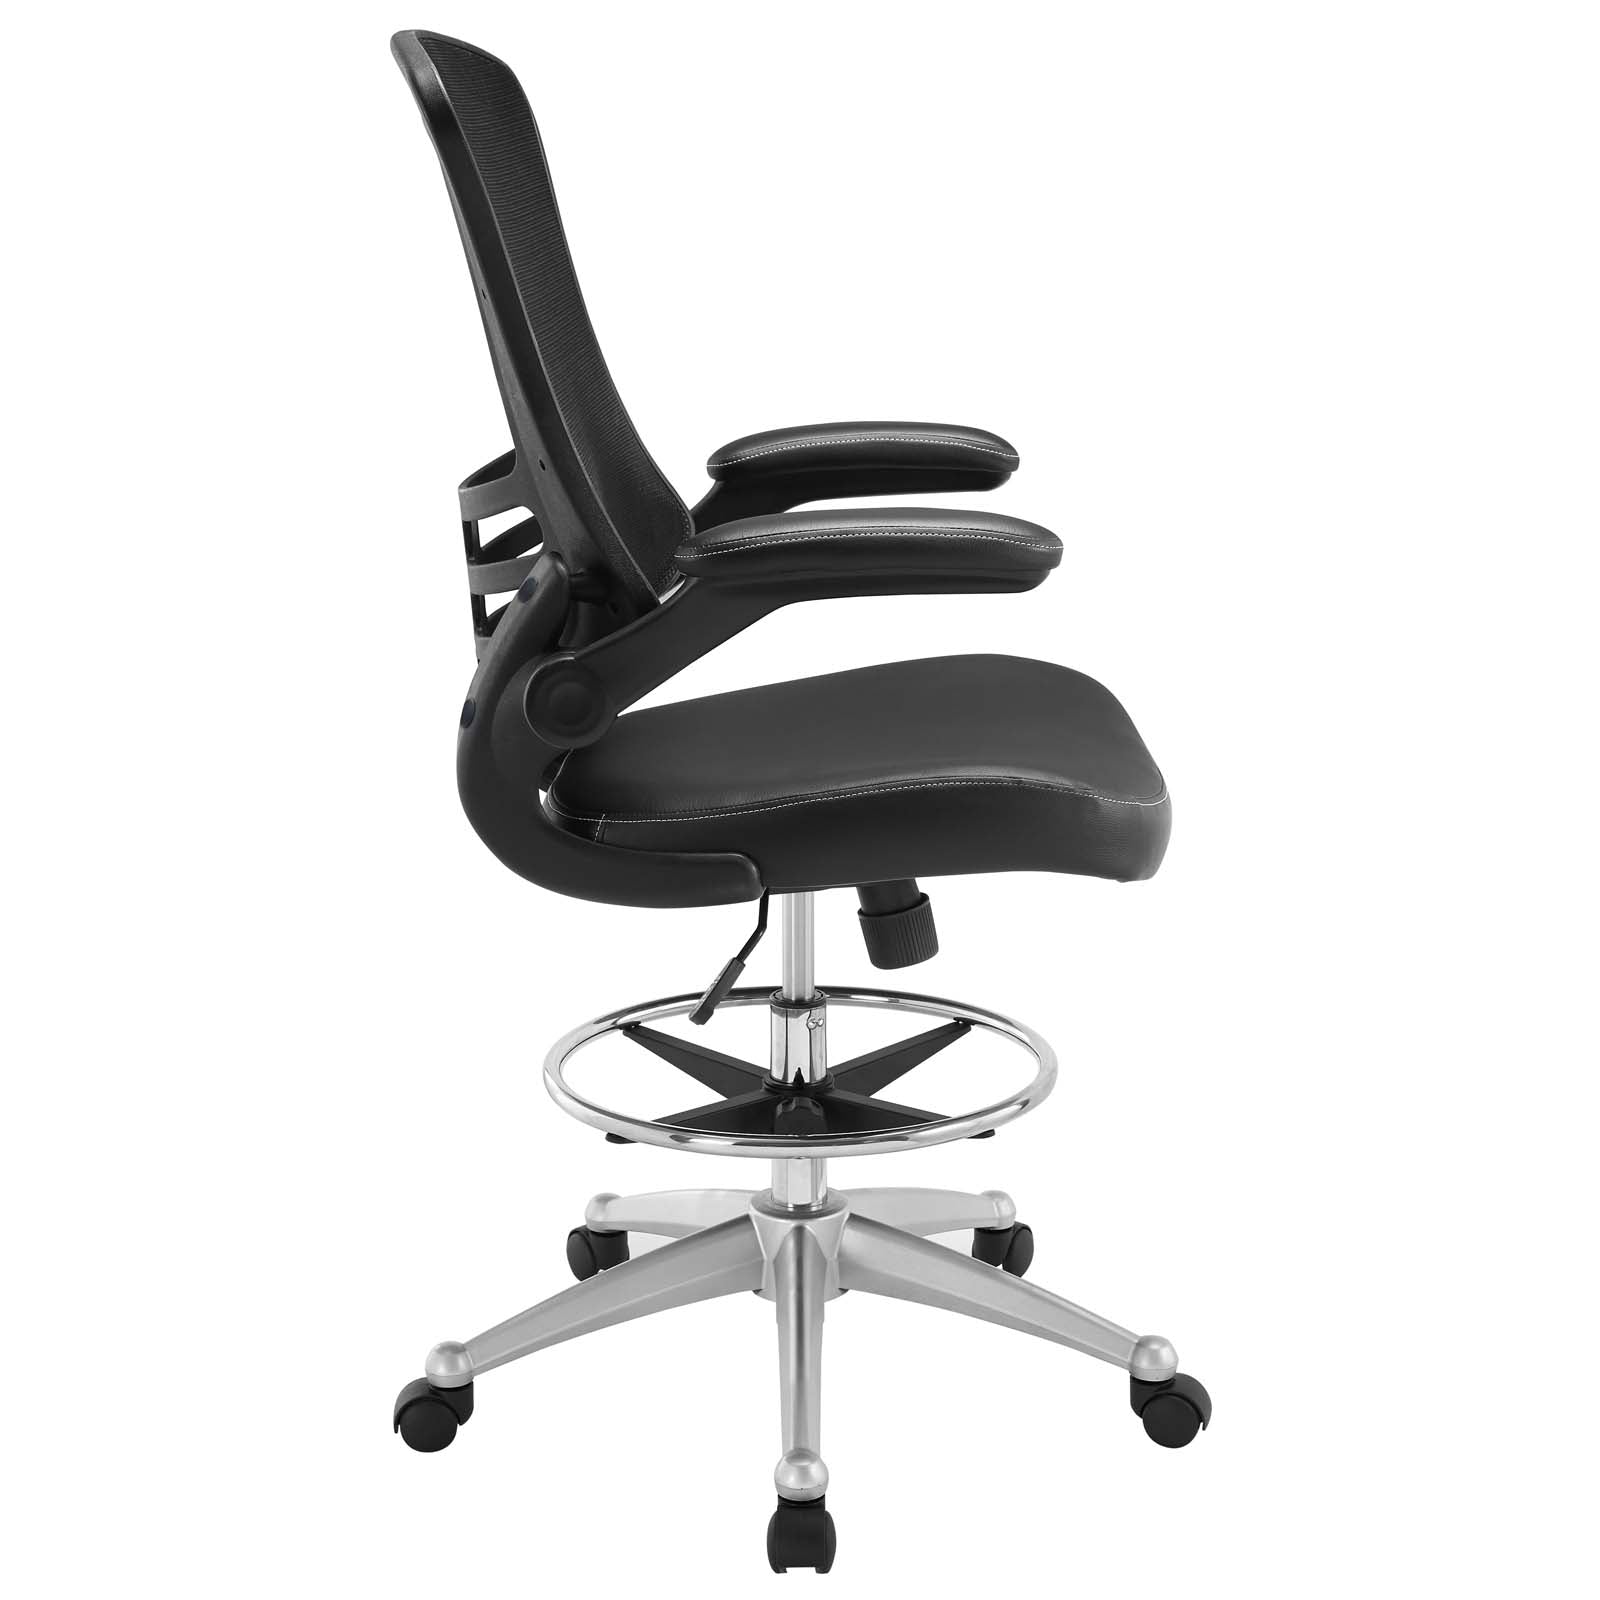 Office furniture: Vinyl Drafting Chair for beautiful Offices